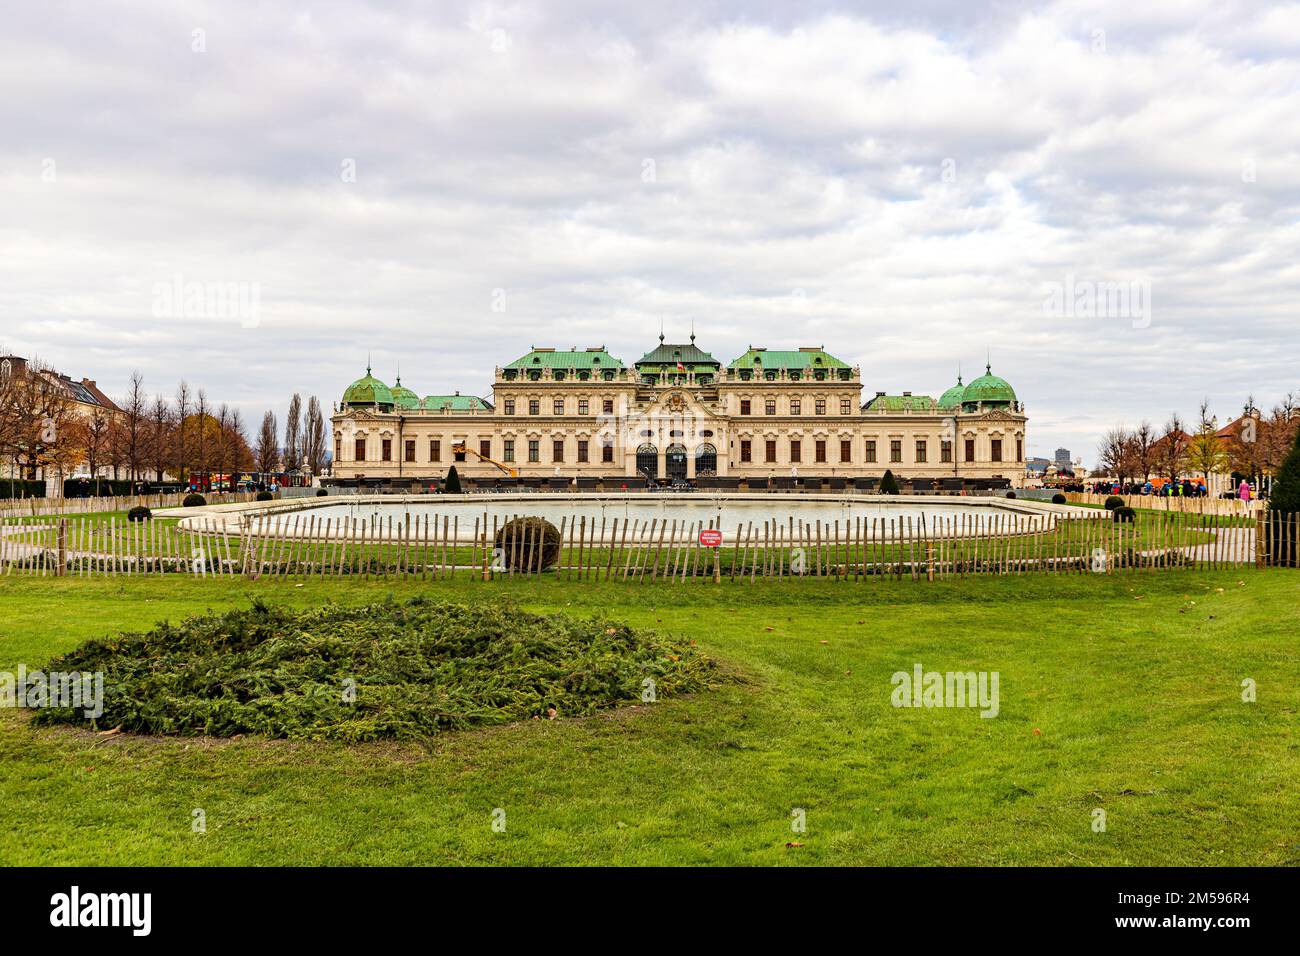 Cityscape with Schloss Belvedere in Vienna. Belvedere Castle and its Christmas market. Stock Photo